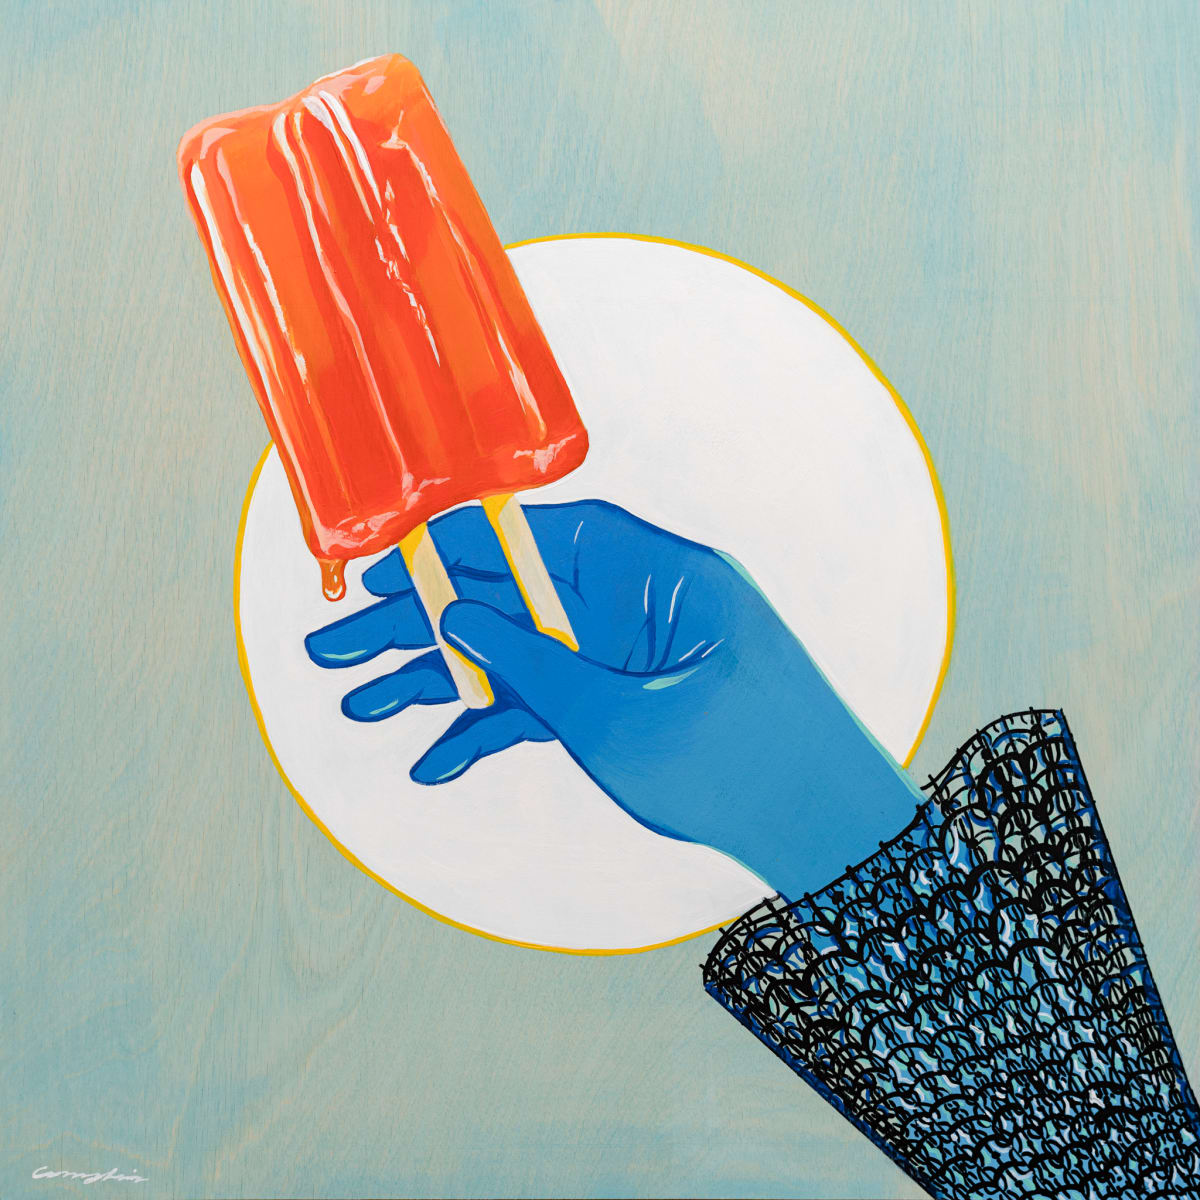 12 O'Clock Popsicle by Amy Lewis  Image: Acrylic painting of a blue gloved hand holding an orange popsicle. 